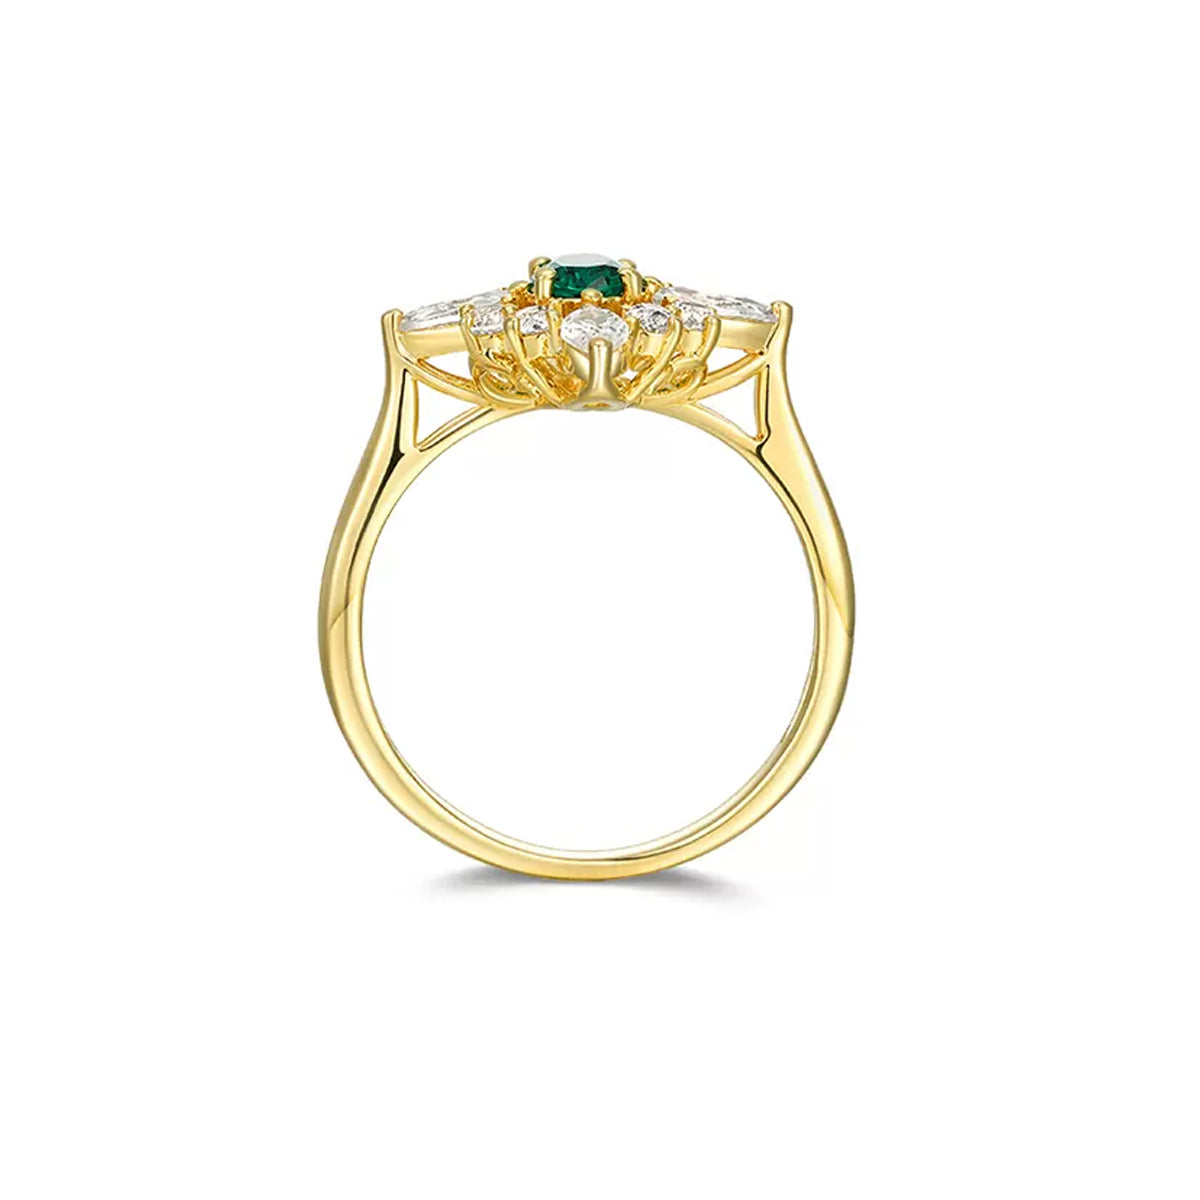 Siliice Jewelry - Emerald Series  Ring - Green Lab-grown Gemstones Ring For Women